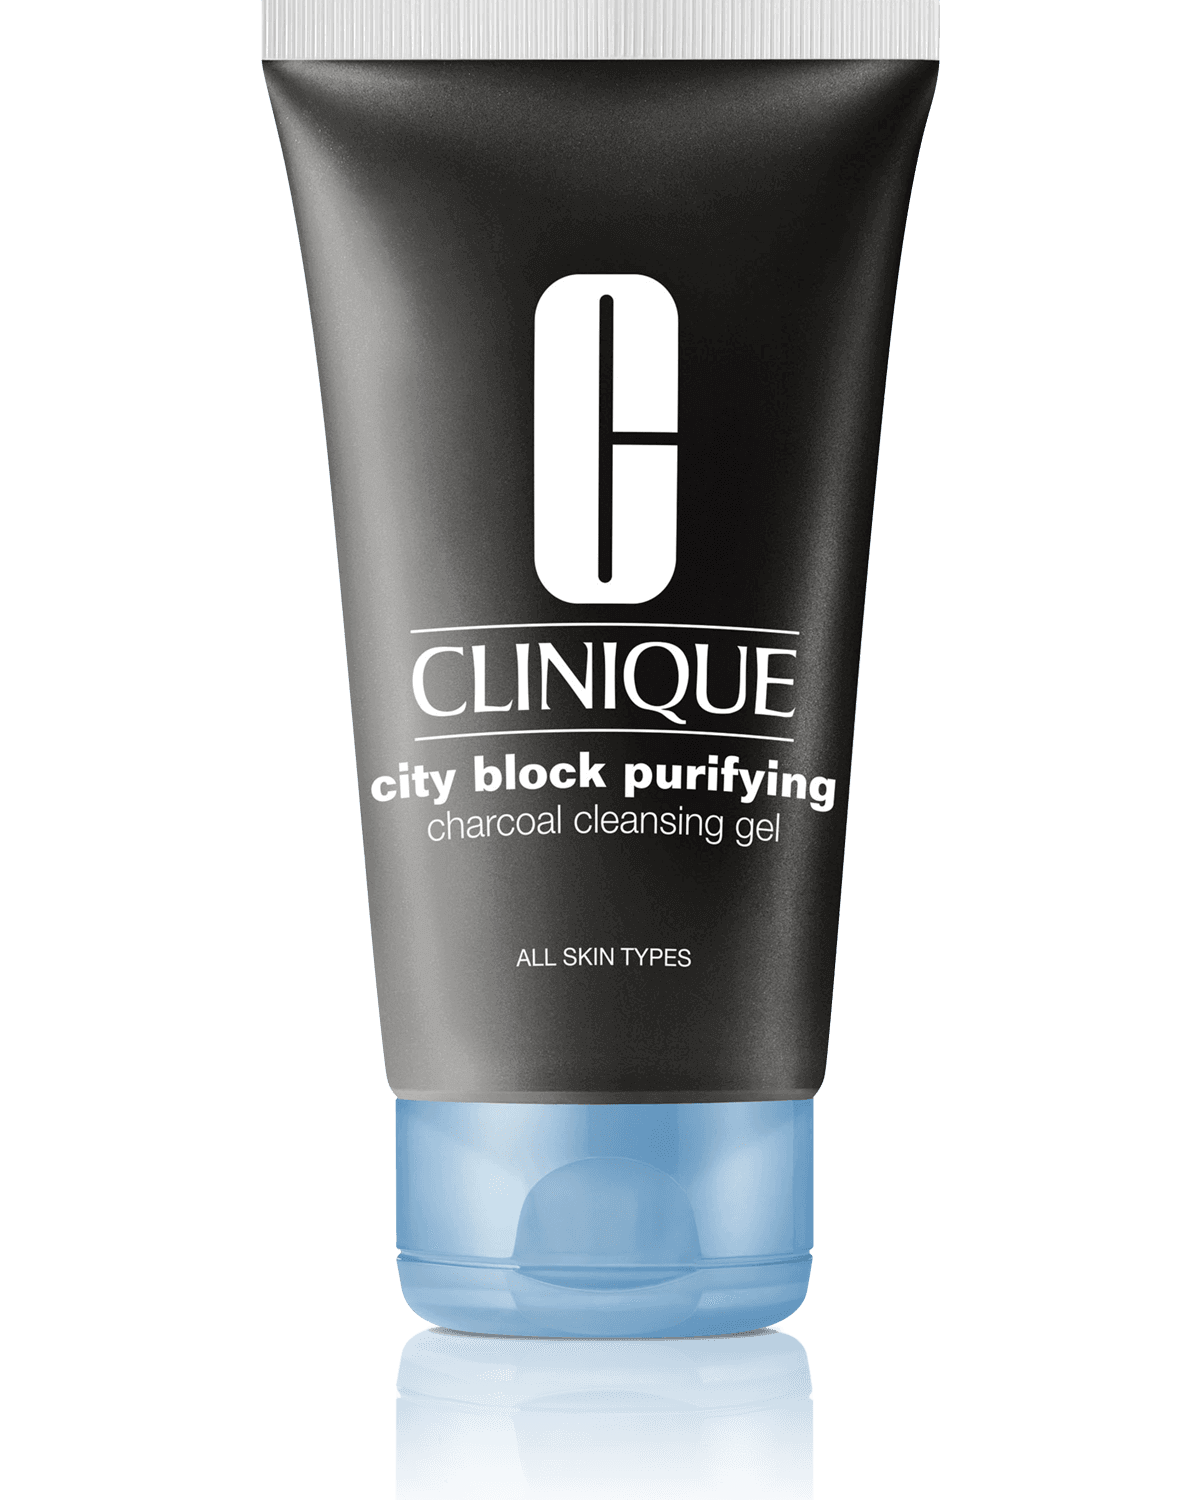 City Block Purifying Charcoal Cleansing Gel